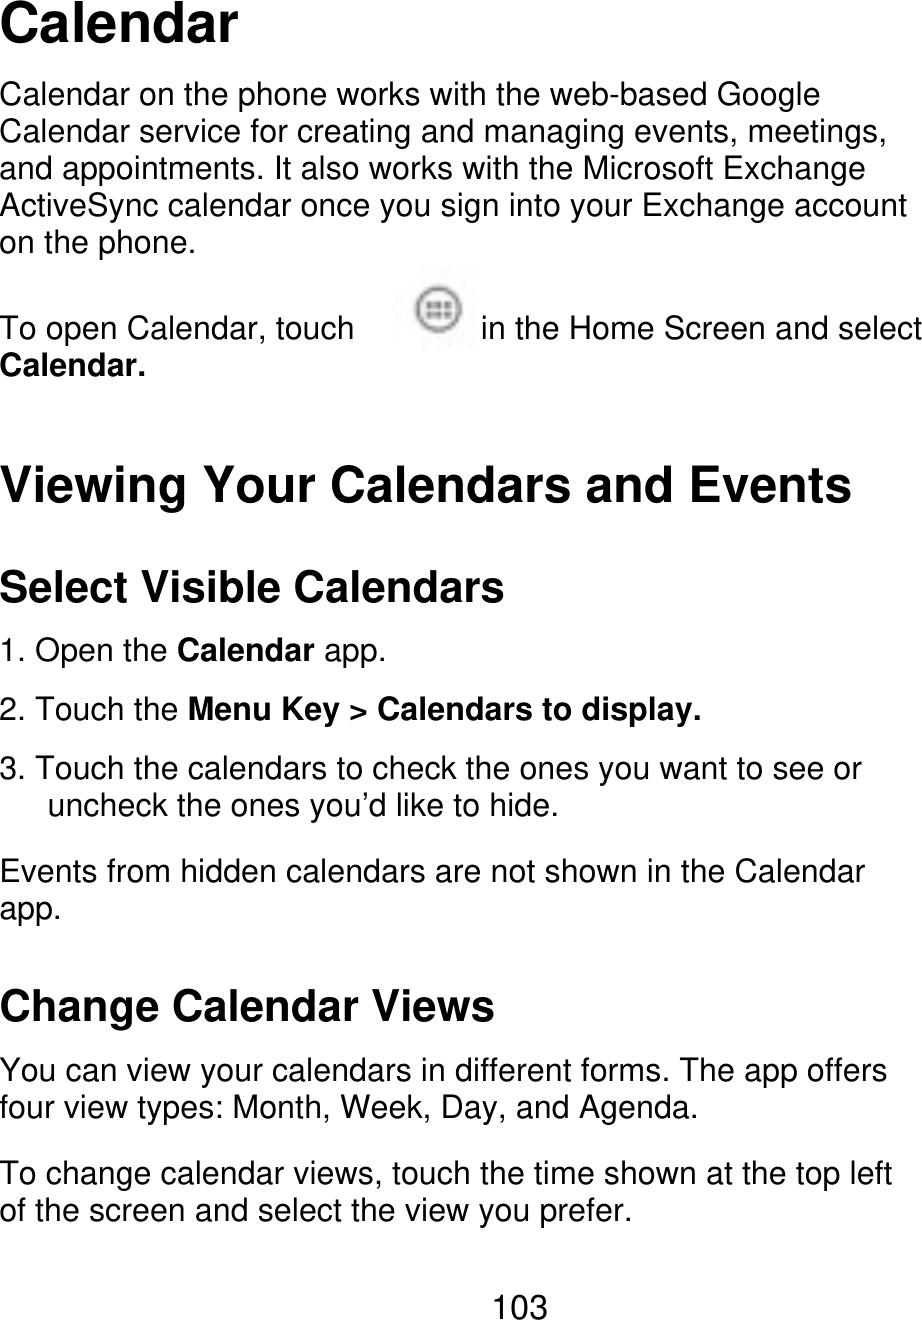 Calendar Calendar on the phone works with the web-based Google Calendar service for creating and managing events, meetings, and appointments. It also works with the Microsoft Exchange ActiveSync calendar once you sign into your Exchange account on the phone. To open Calendar, touch Calendar. in the Home Screen and select Viewing Your Calendars and Events Select Visible Calendars 1. Open the Calendar app. 2. Touch the Menu Key &gt; Calendars to display. 3. Touch the calendars to check the ones you want to see or       uncheck the ones you’d like to hide. Events from hidden calendars are not shown in the Calendar app. Change Calendar Views You can view your calendars in different forms. The app offers four view types: Month, Week, Day, and Agenda. To change calendar views, touch the time shown at the top left of the screen and select the view you prefer. 103 